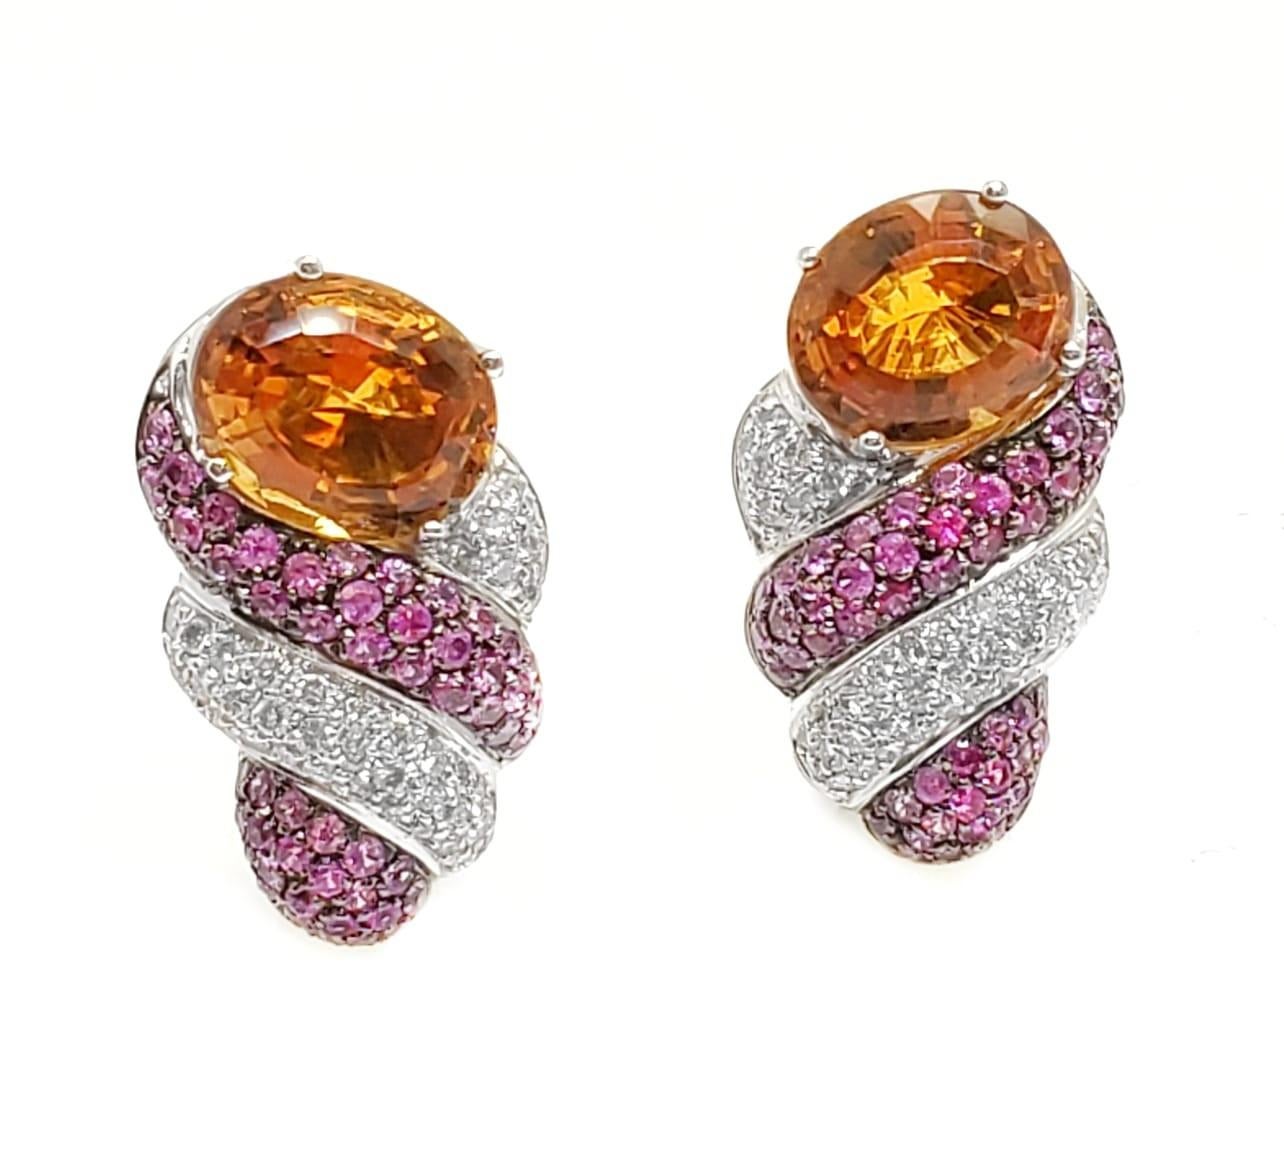 Mixed Cut Andreoli Citrine Pink Sapphire Diamond 18 Karat White Gold Earrings For Sale